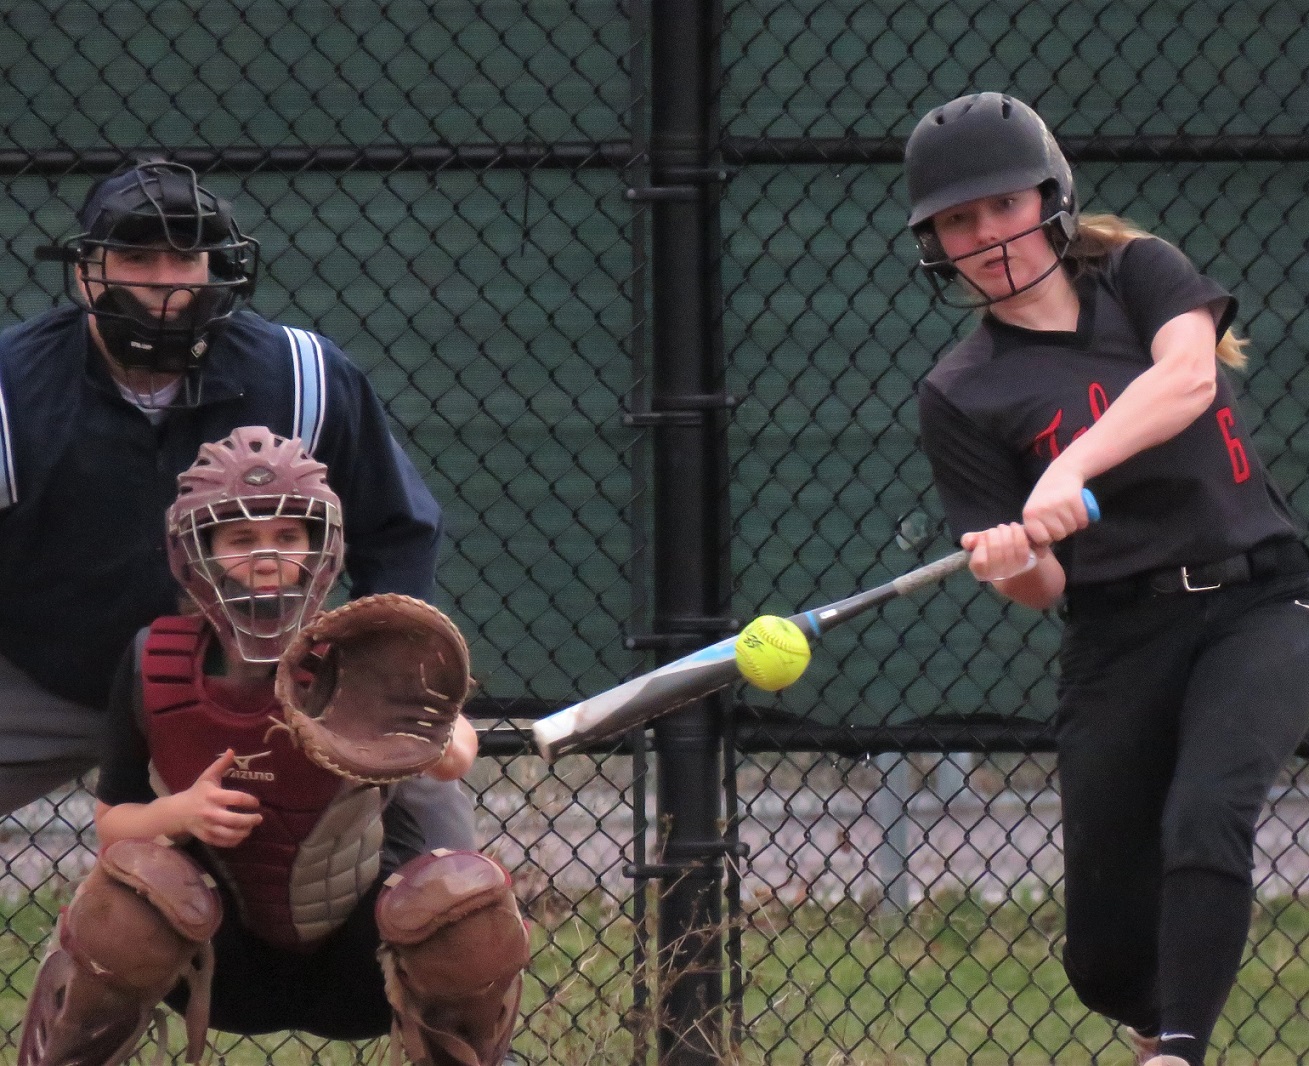 Niagara-Wheatfield Falcons catcher Sydney Crangle ropes a game-tying double to score two runs in the bottom of the fourth inning during a 5-4 victory over Lewiston-Porter. (Photo by David Yarger)